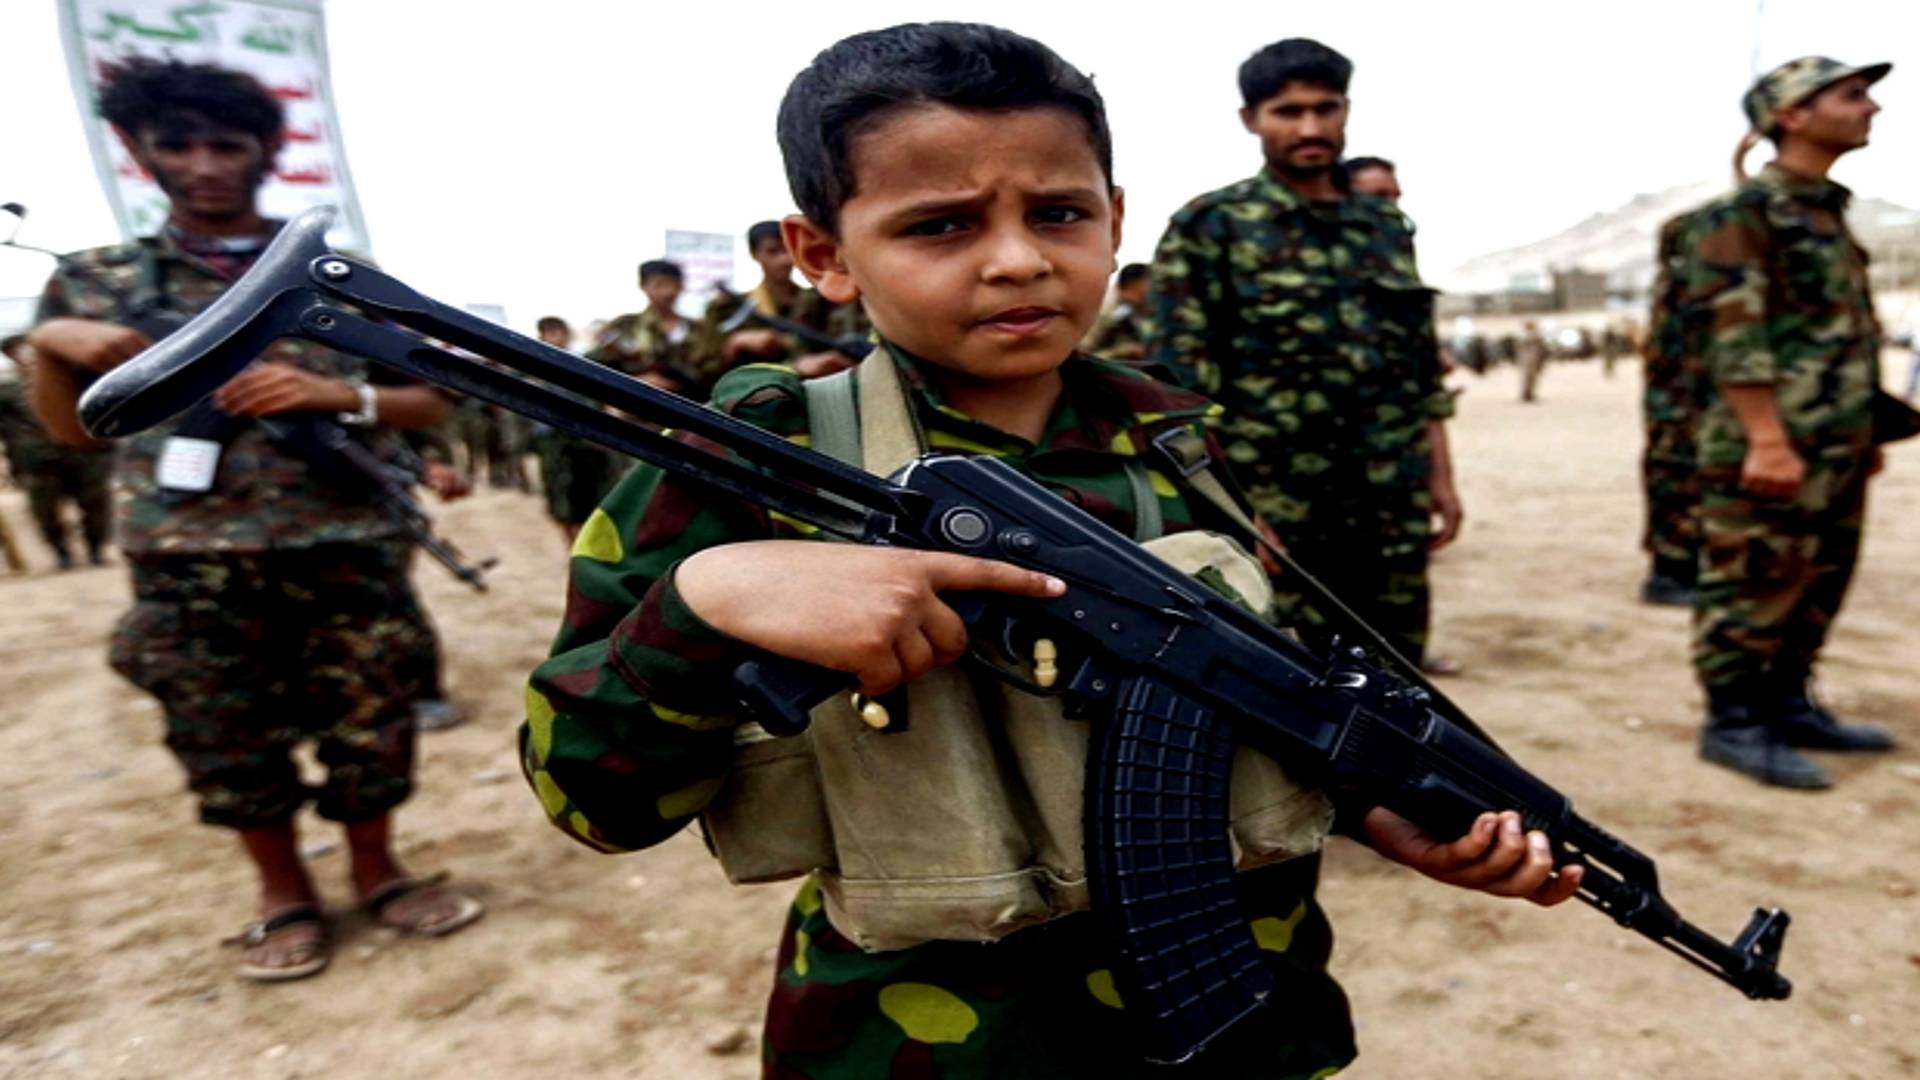 What is behind the rising number of child soldiers? | War & Conflict | Al Jazeera